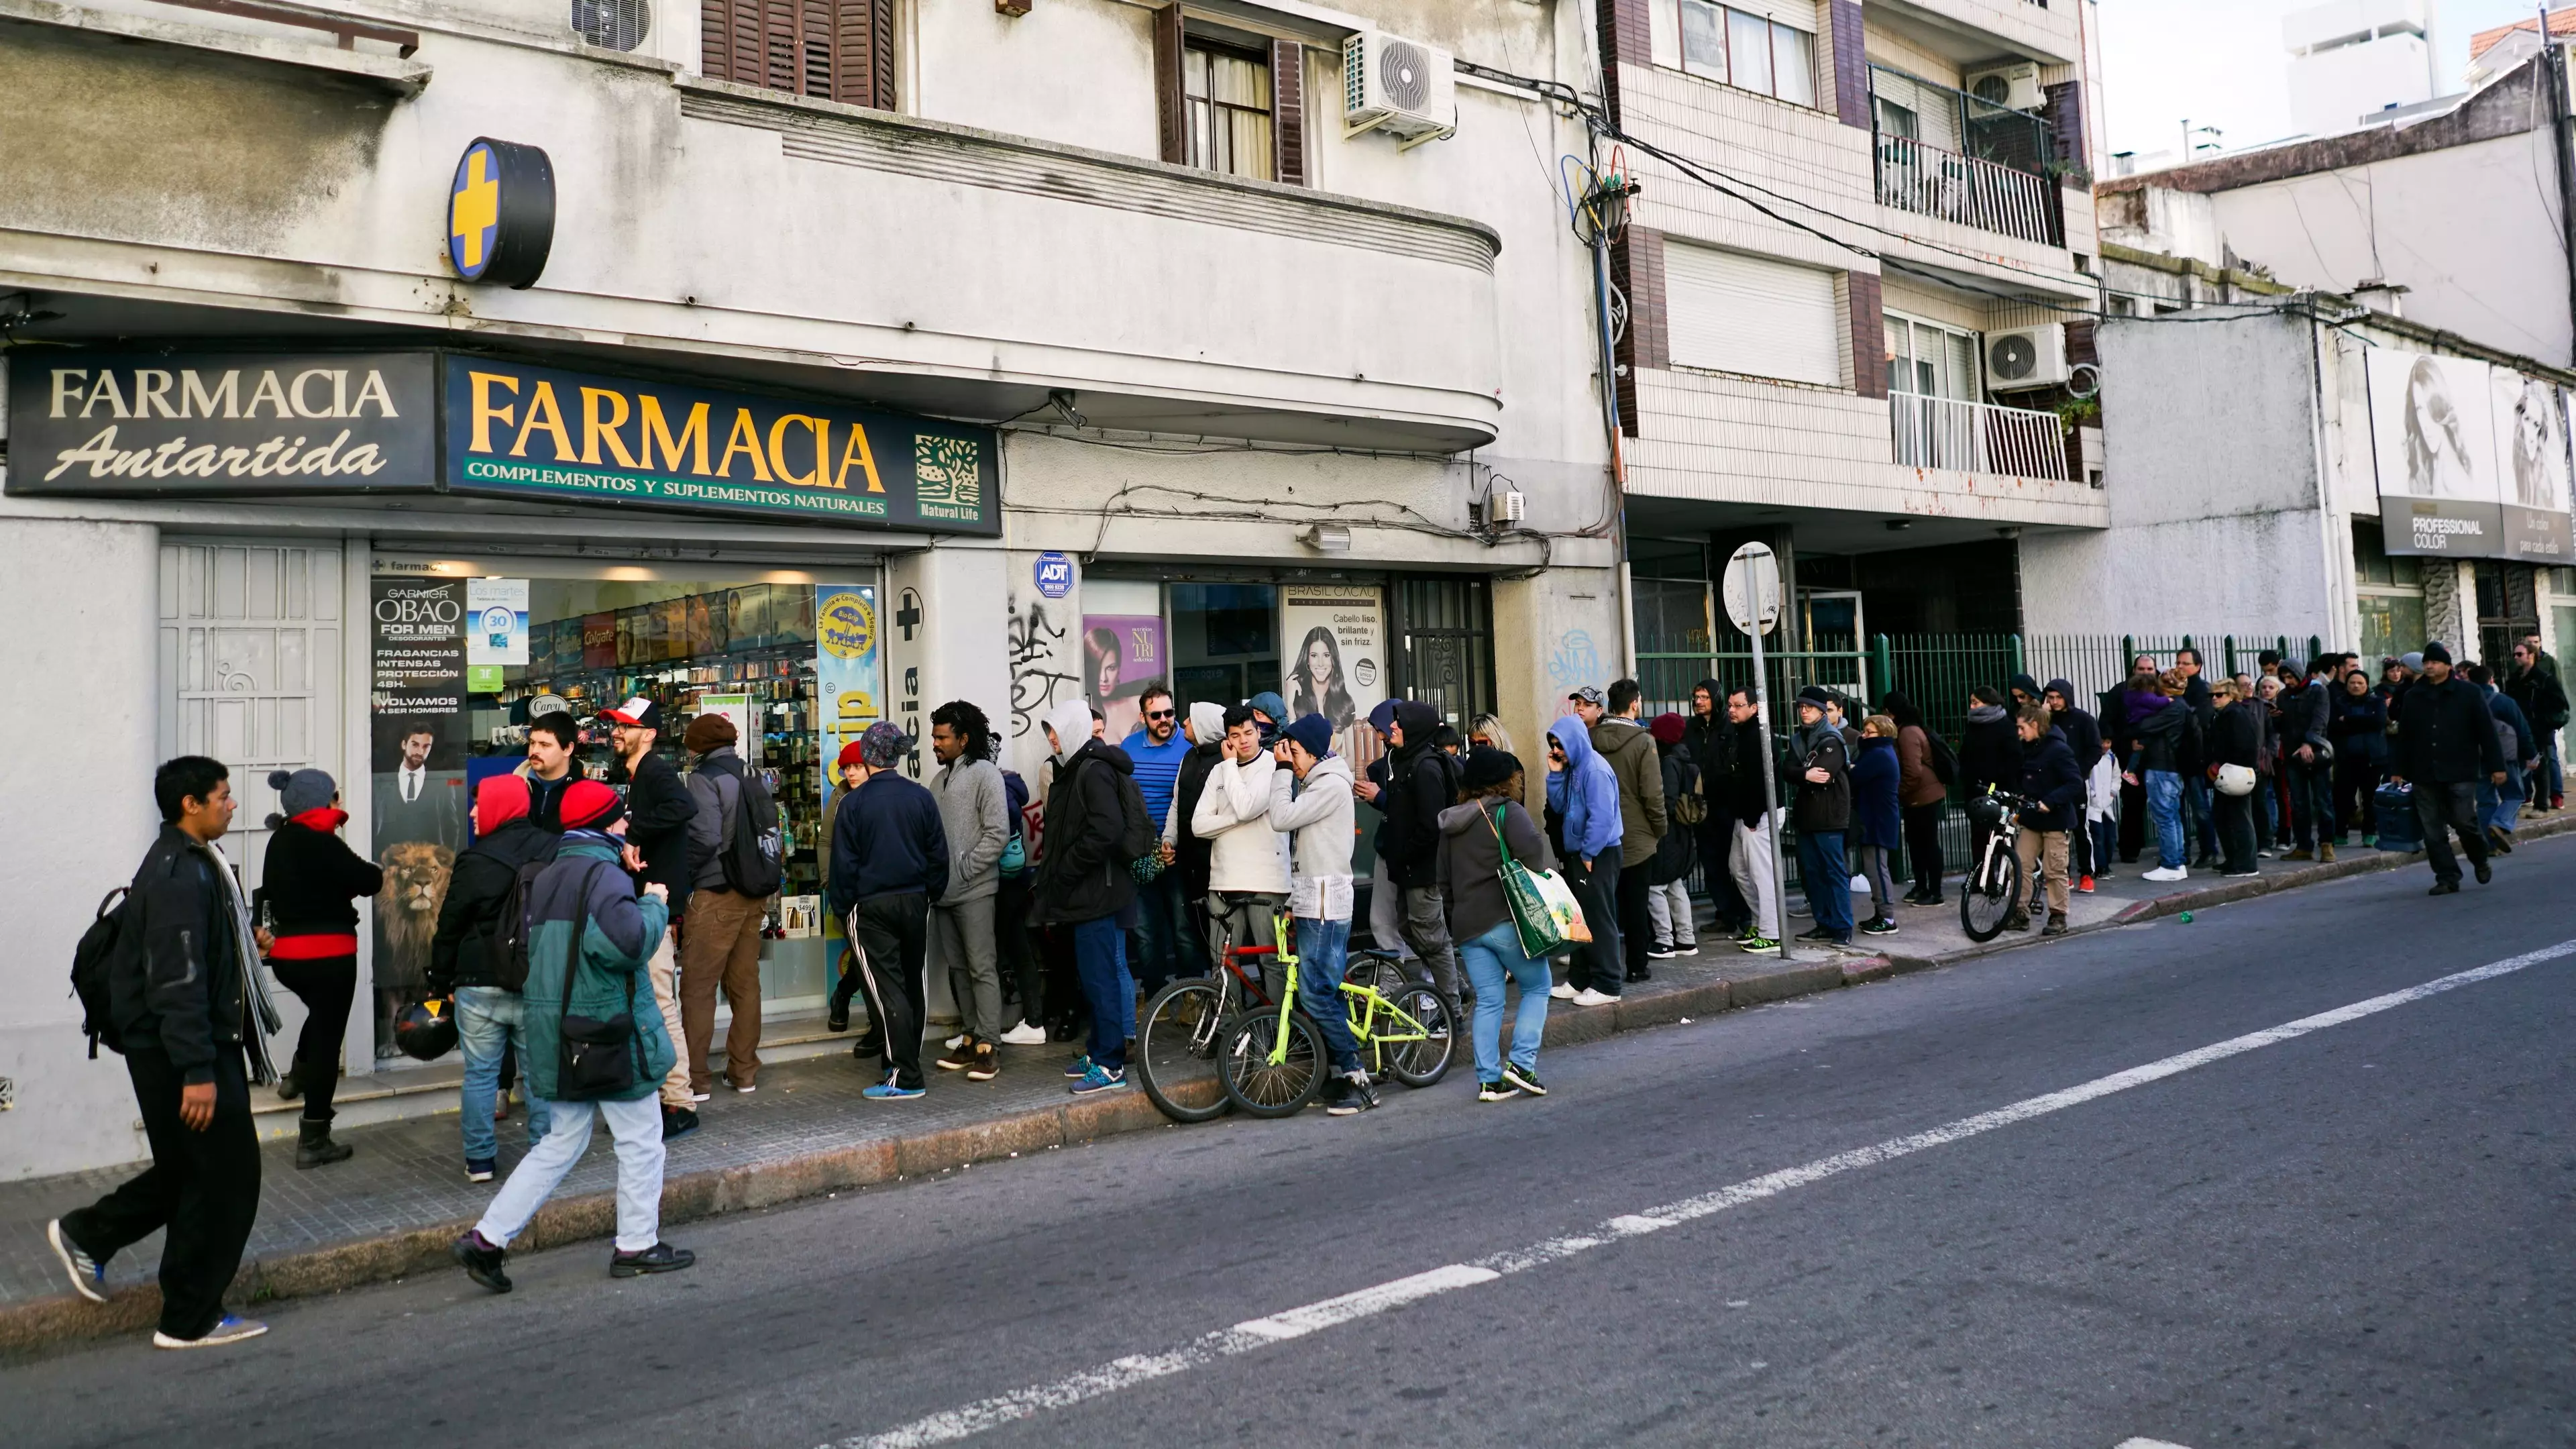 ​Chemists In Uruguay Are Selling Cannabis Directly To Customers